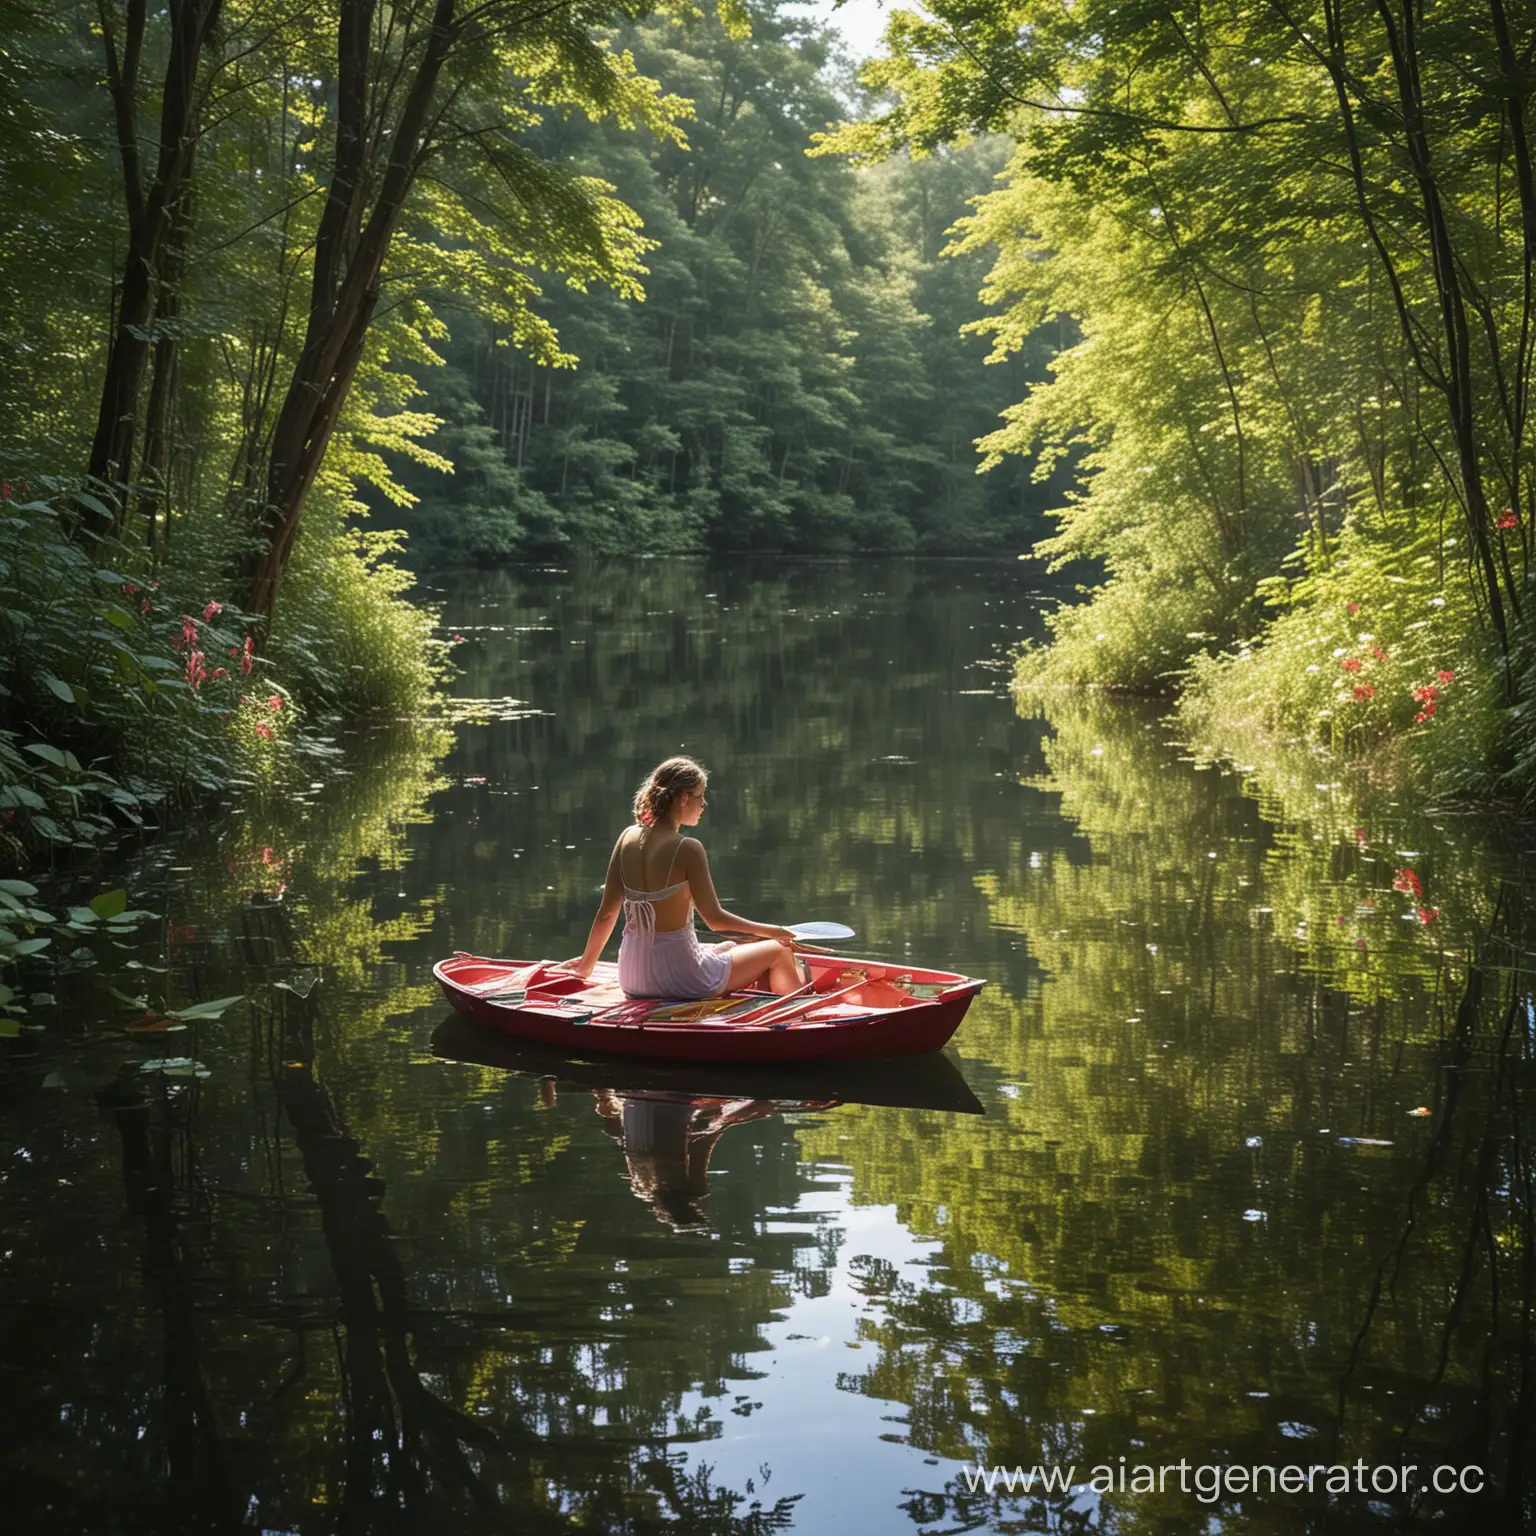 Tranquil-Pedalo-Ride-on-the-Colorful-Lake-in-Forest-Serenity